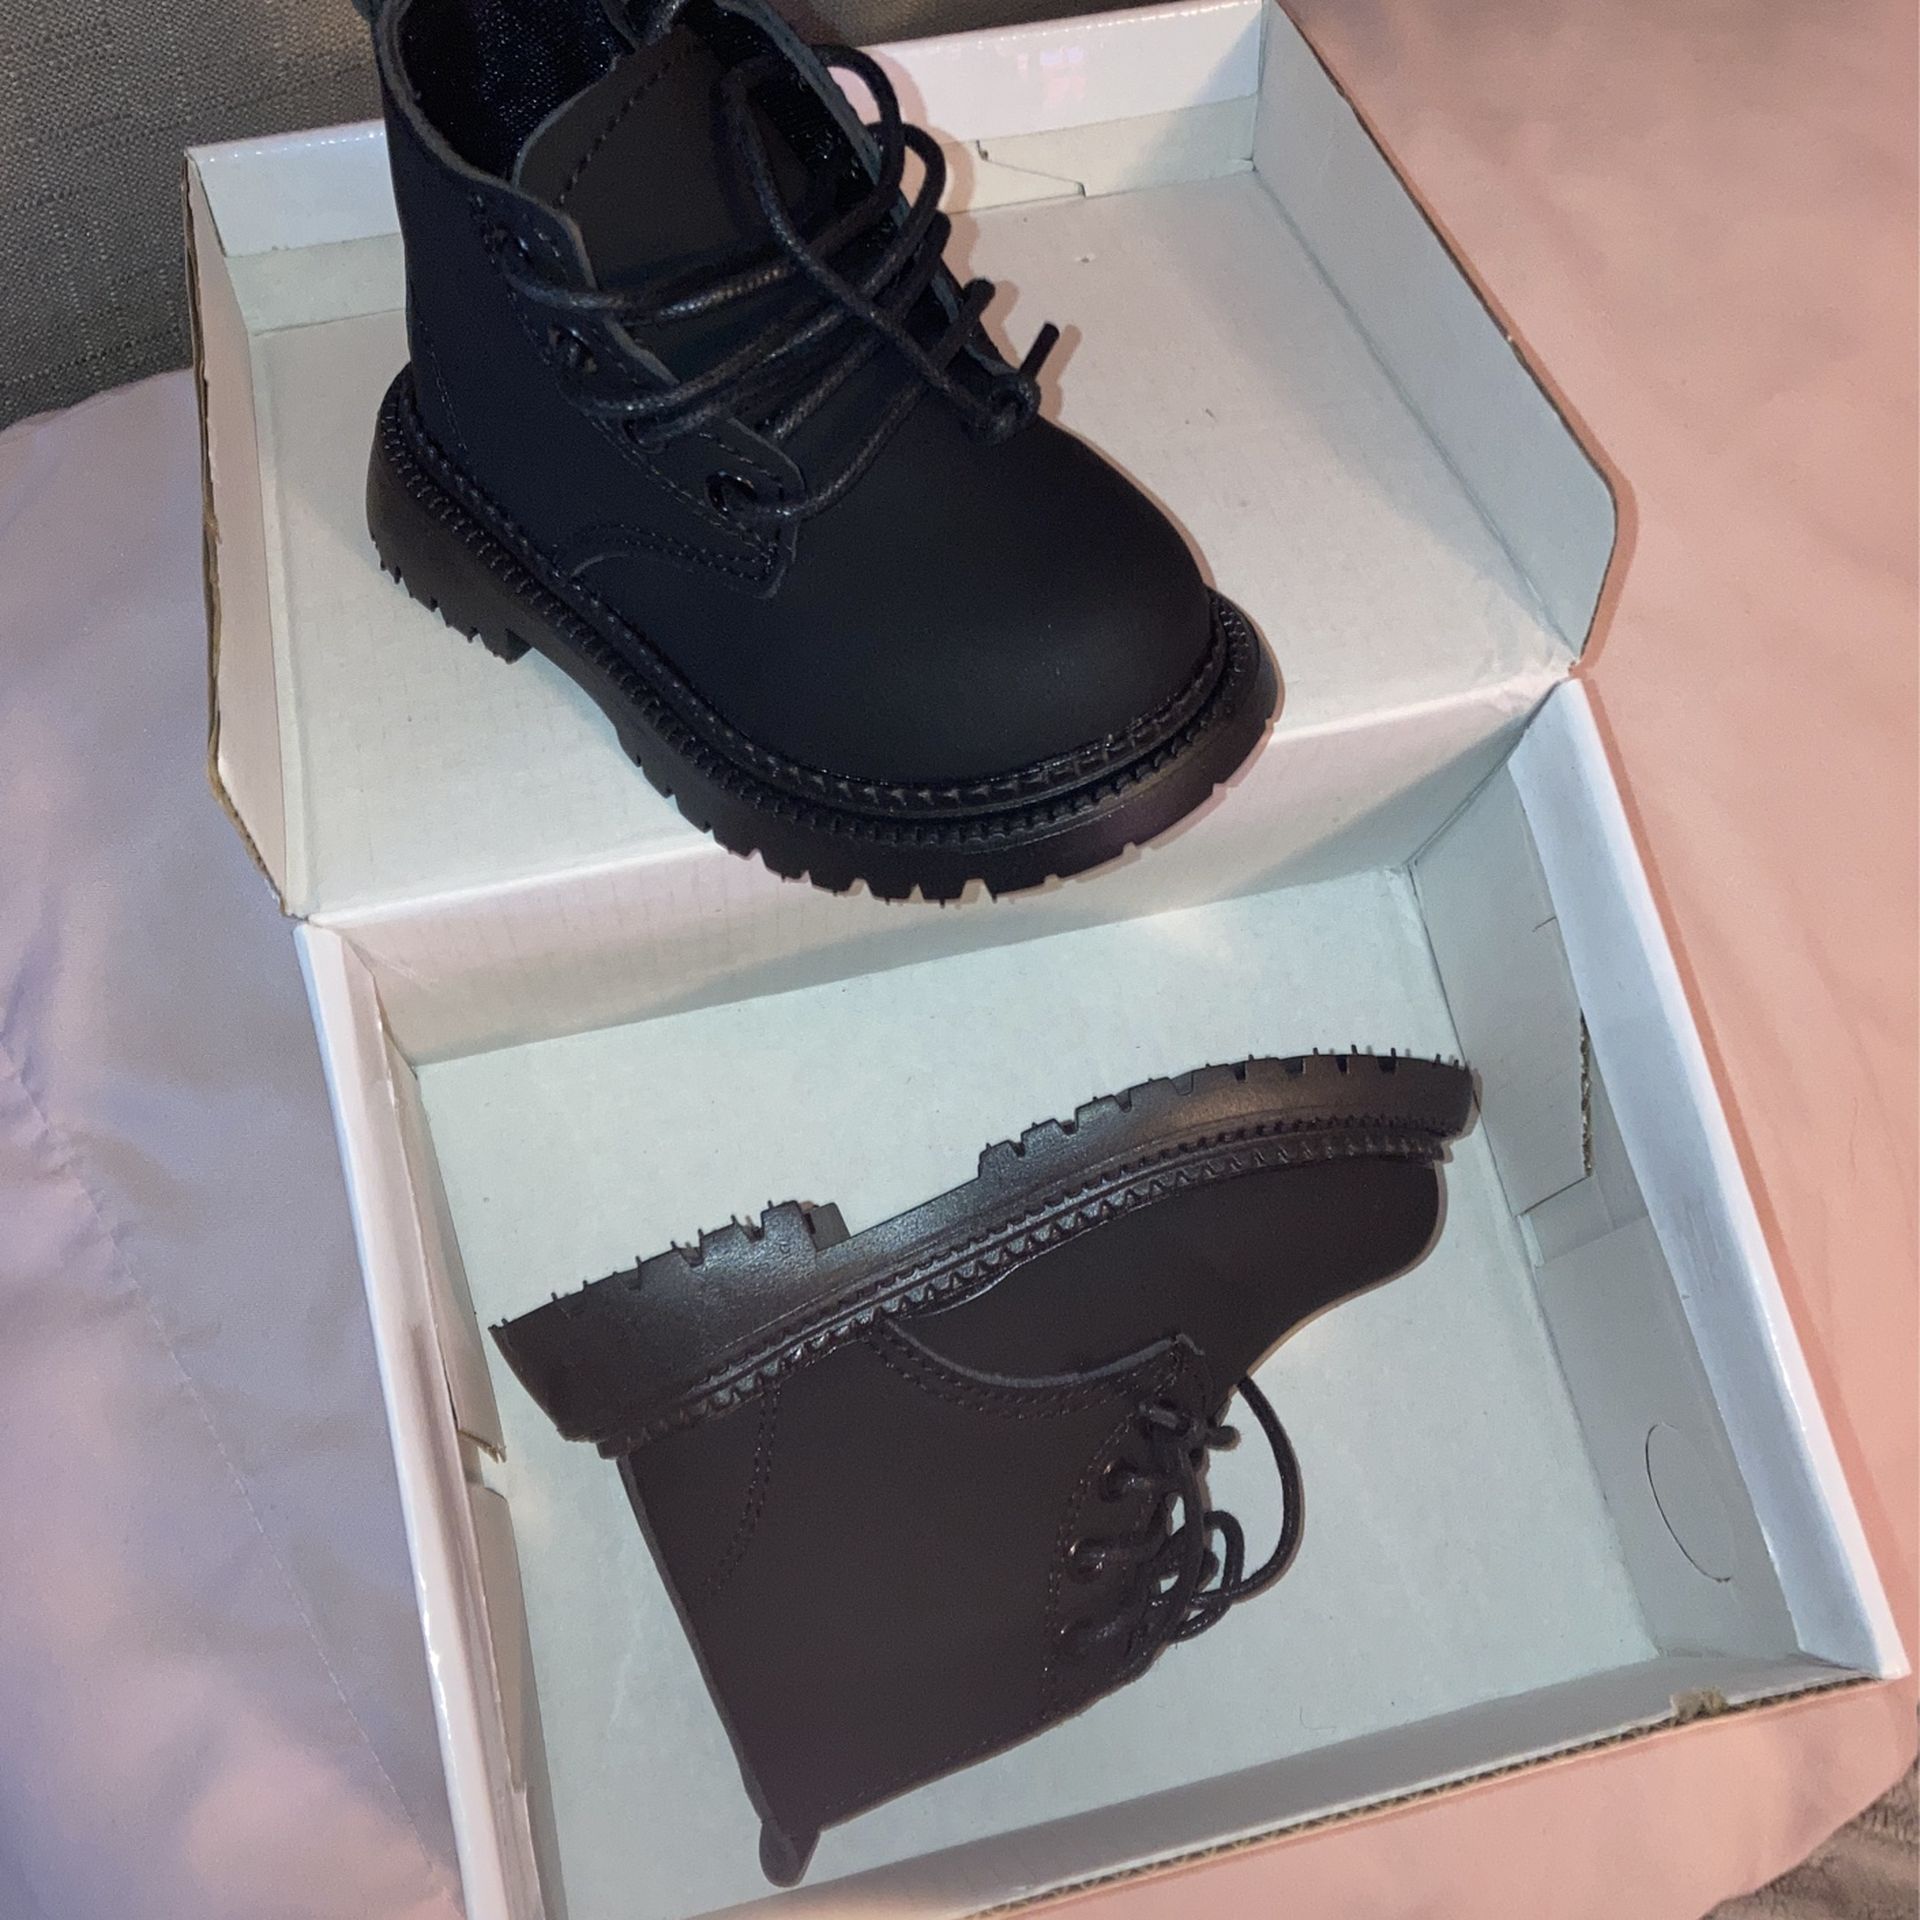 New Baby Boy Boots 5.5 Size 